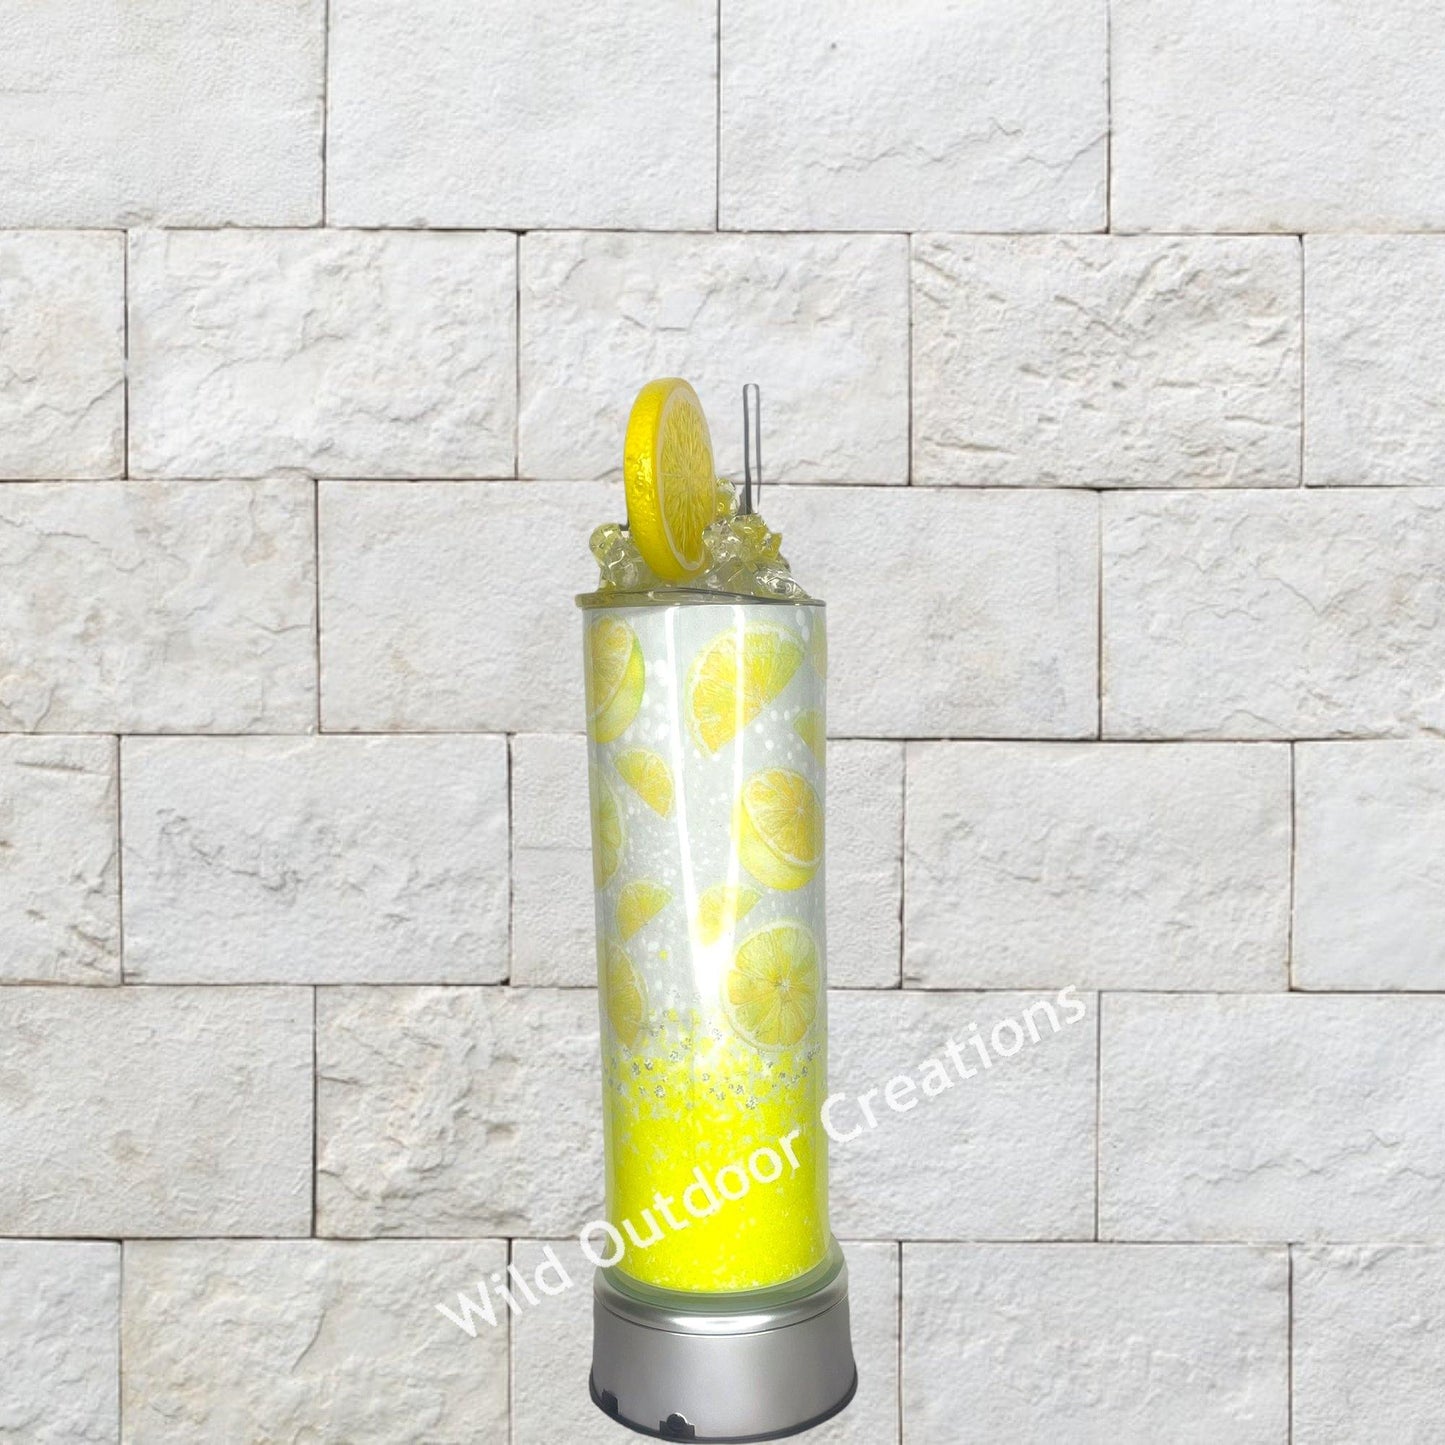 When Life Gives You Lemons Tumbler, Vodka Tumbler, Water Bottle w Lid and Straw, Ice Topped Tumbler - Wild Outdoor Creations